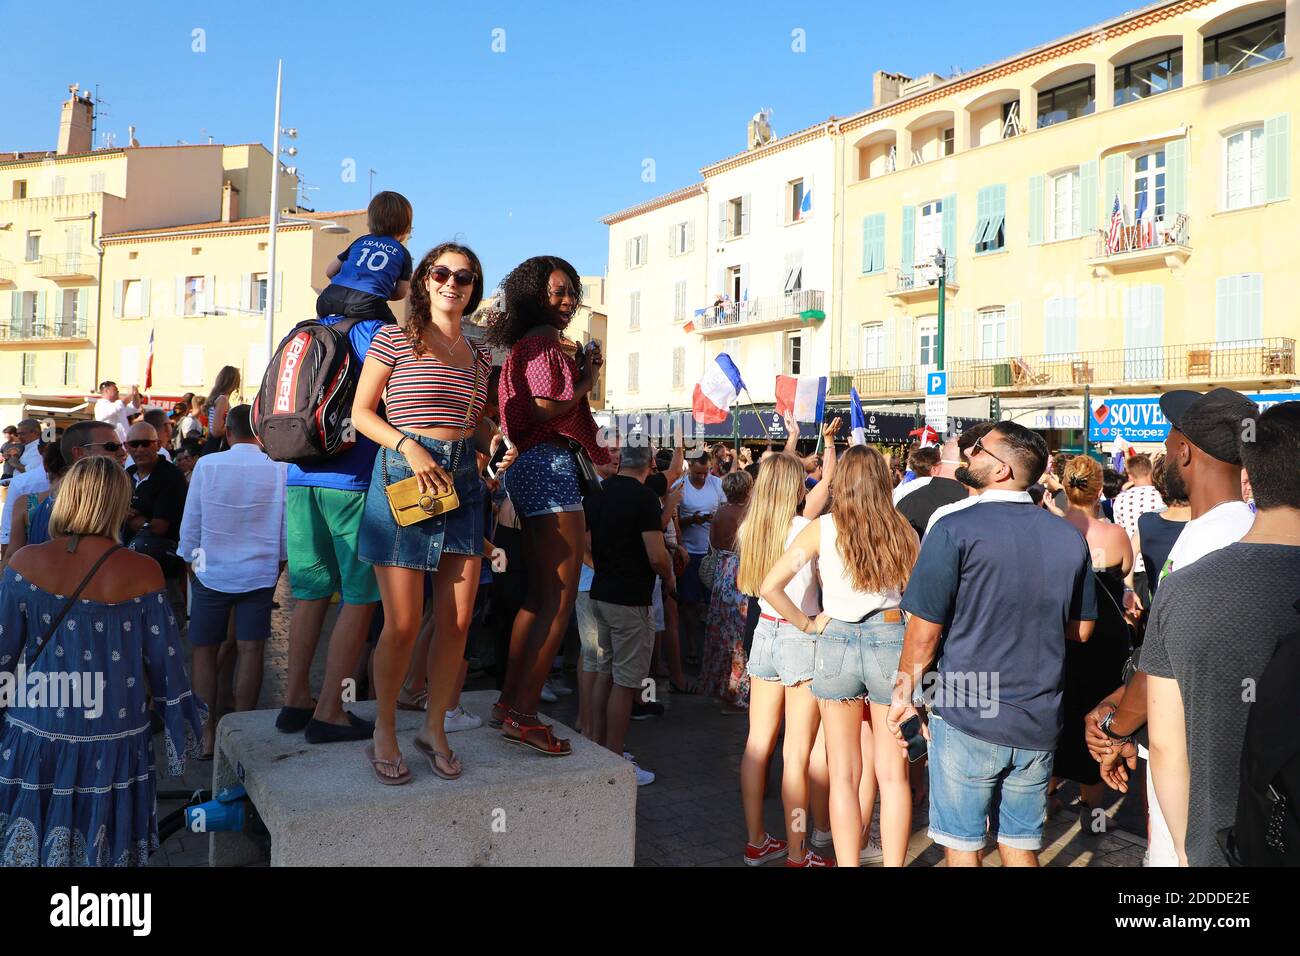 Football fans celebrate after their team scored a 4-2 victory over Croatia to win the 2018 FIFA World Cup. St Tropez, south of France, July 15, 2018. Photo by ABACAPRESS.COM Stock Photo